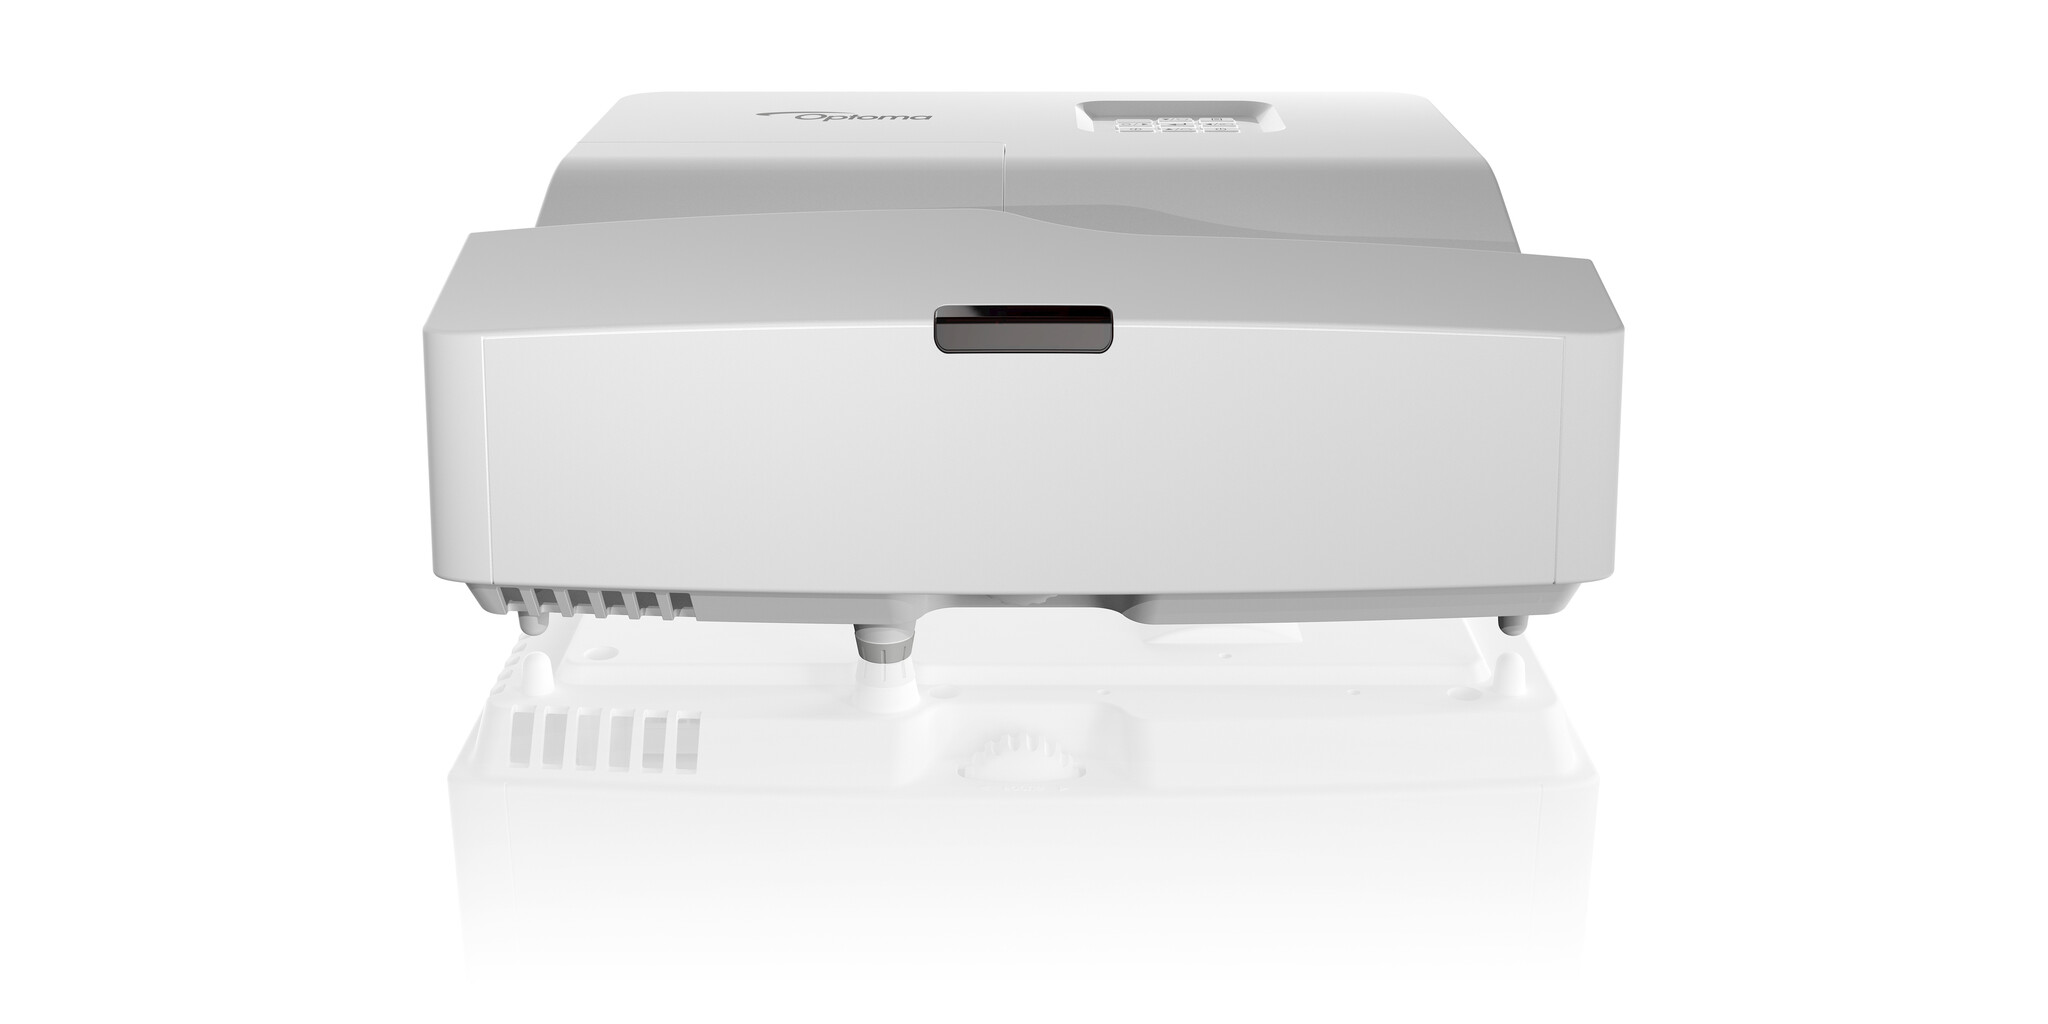 Optoma Ultra Short Throw 1080p Full HD Projector (HD31UST ) – White #353324